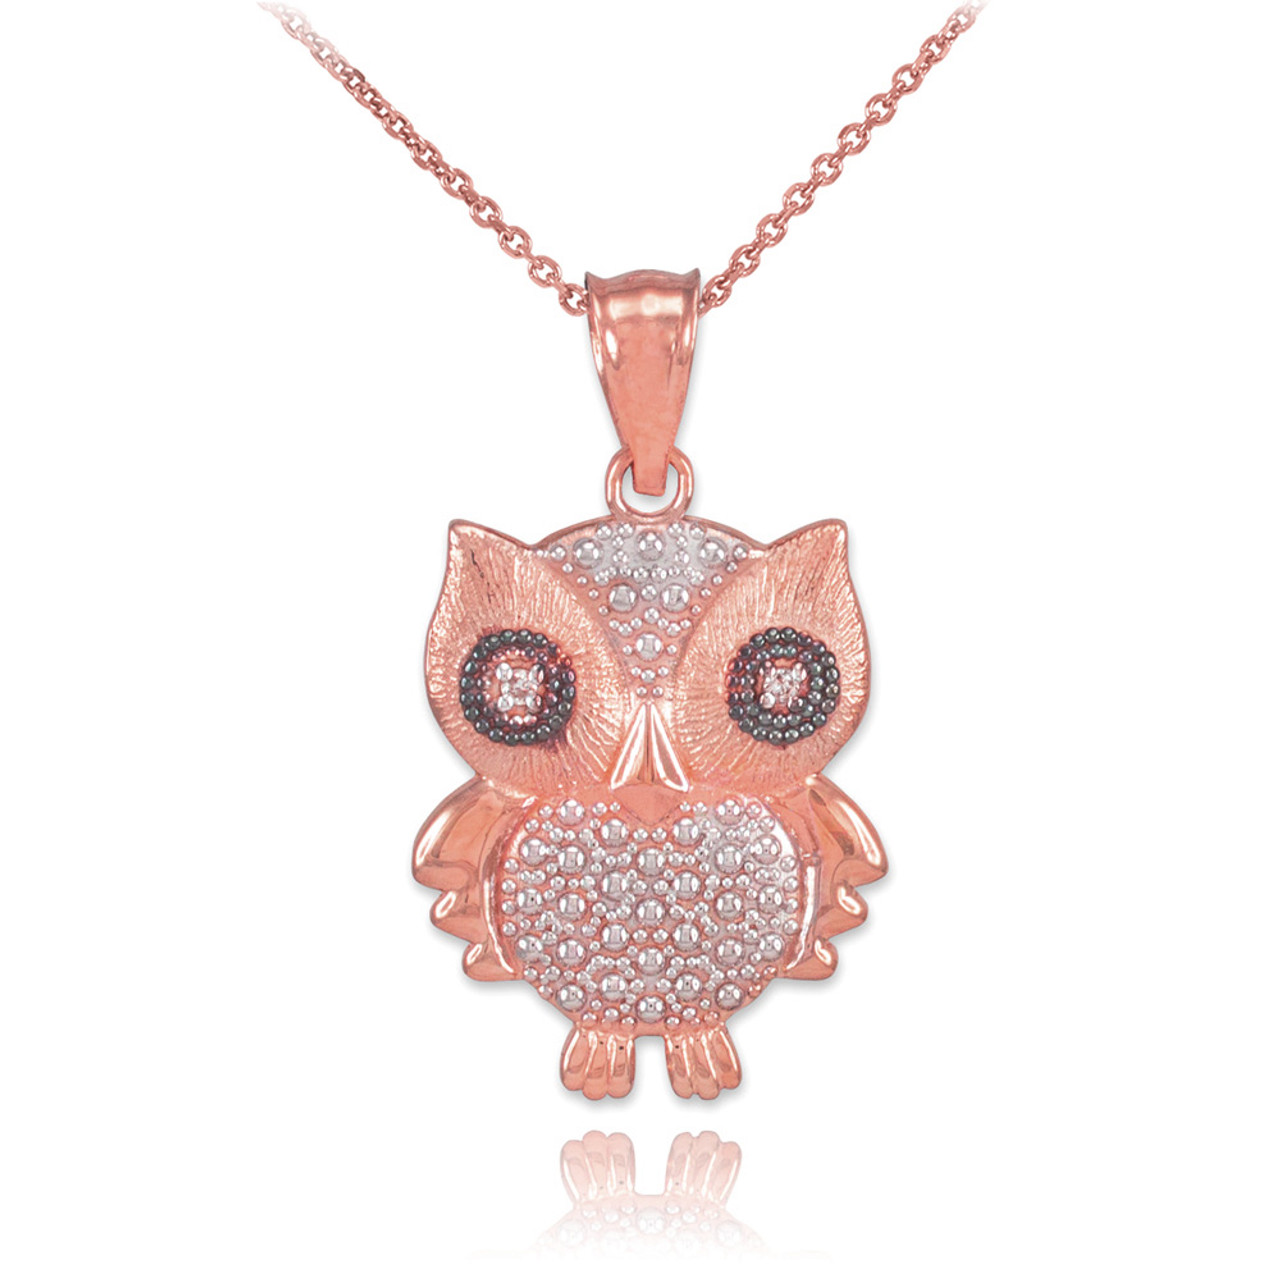 Two-Tone Rose Gold Owl Pendant with Diamonds